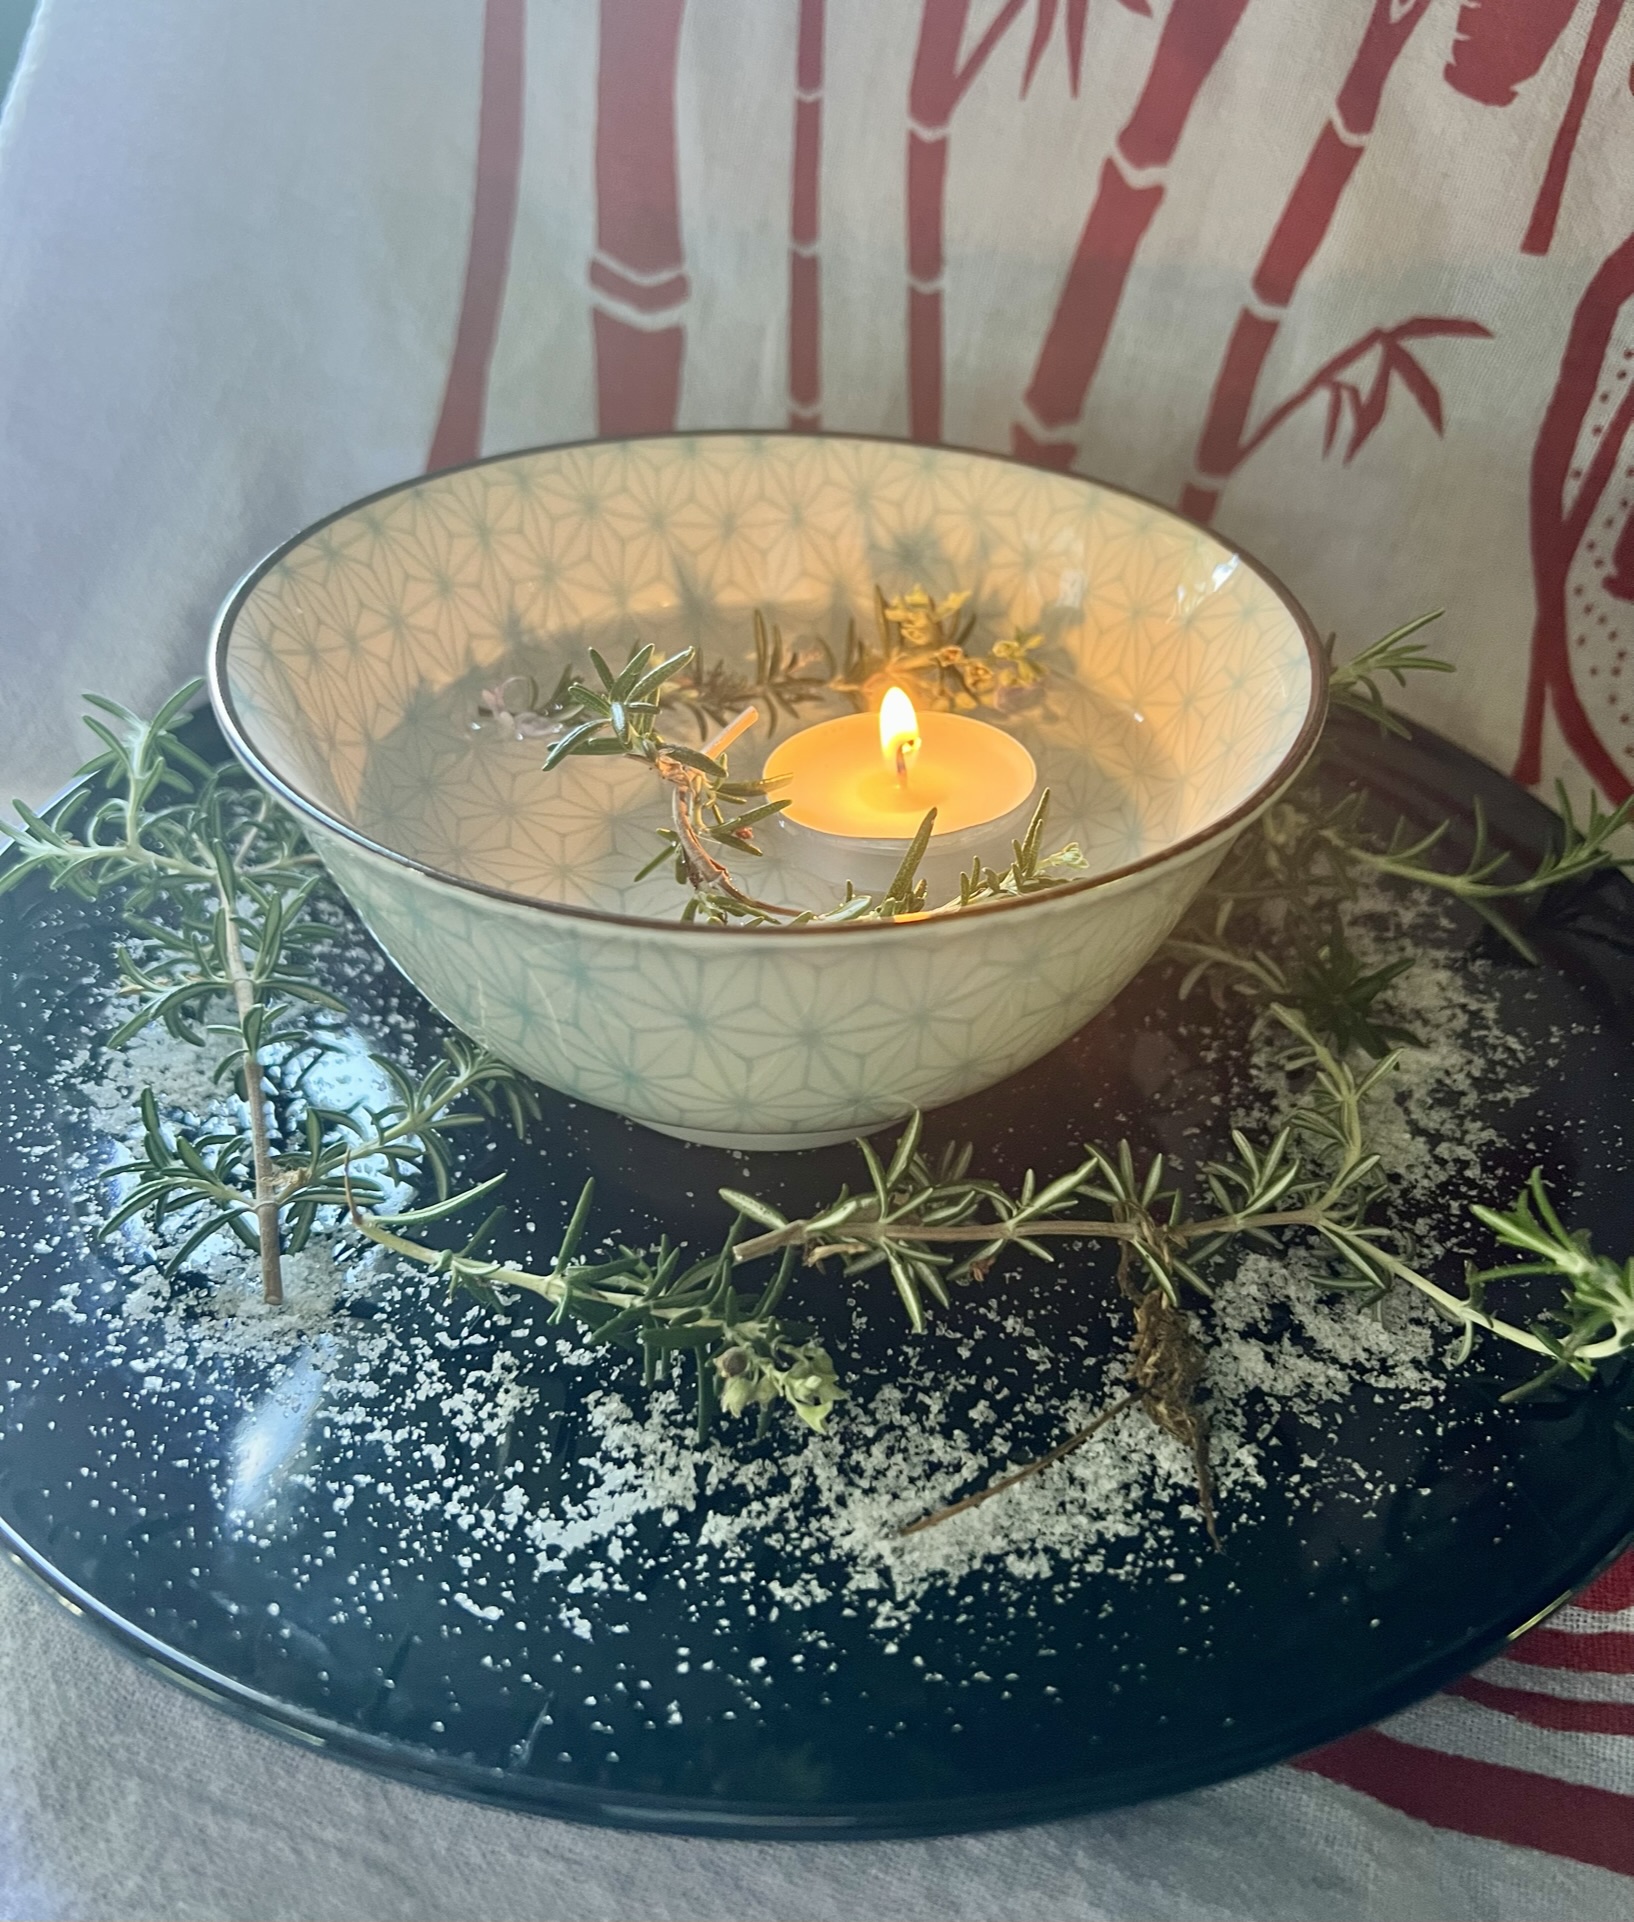 Magick: A Cleansing and Clearing Ritual Spell – Excerpt